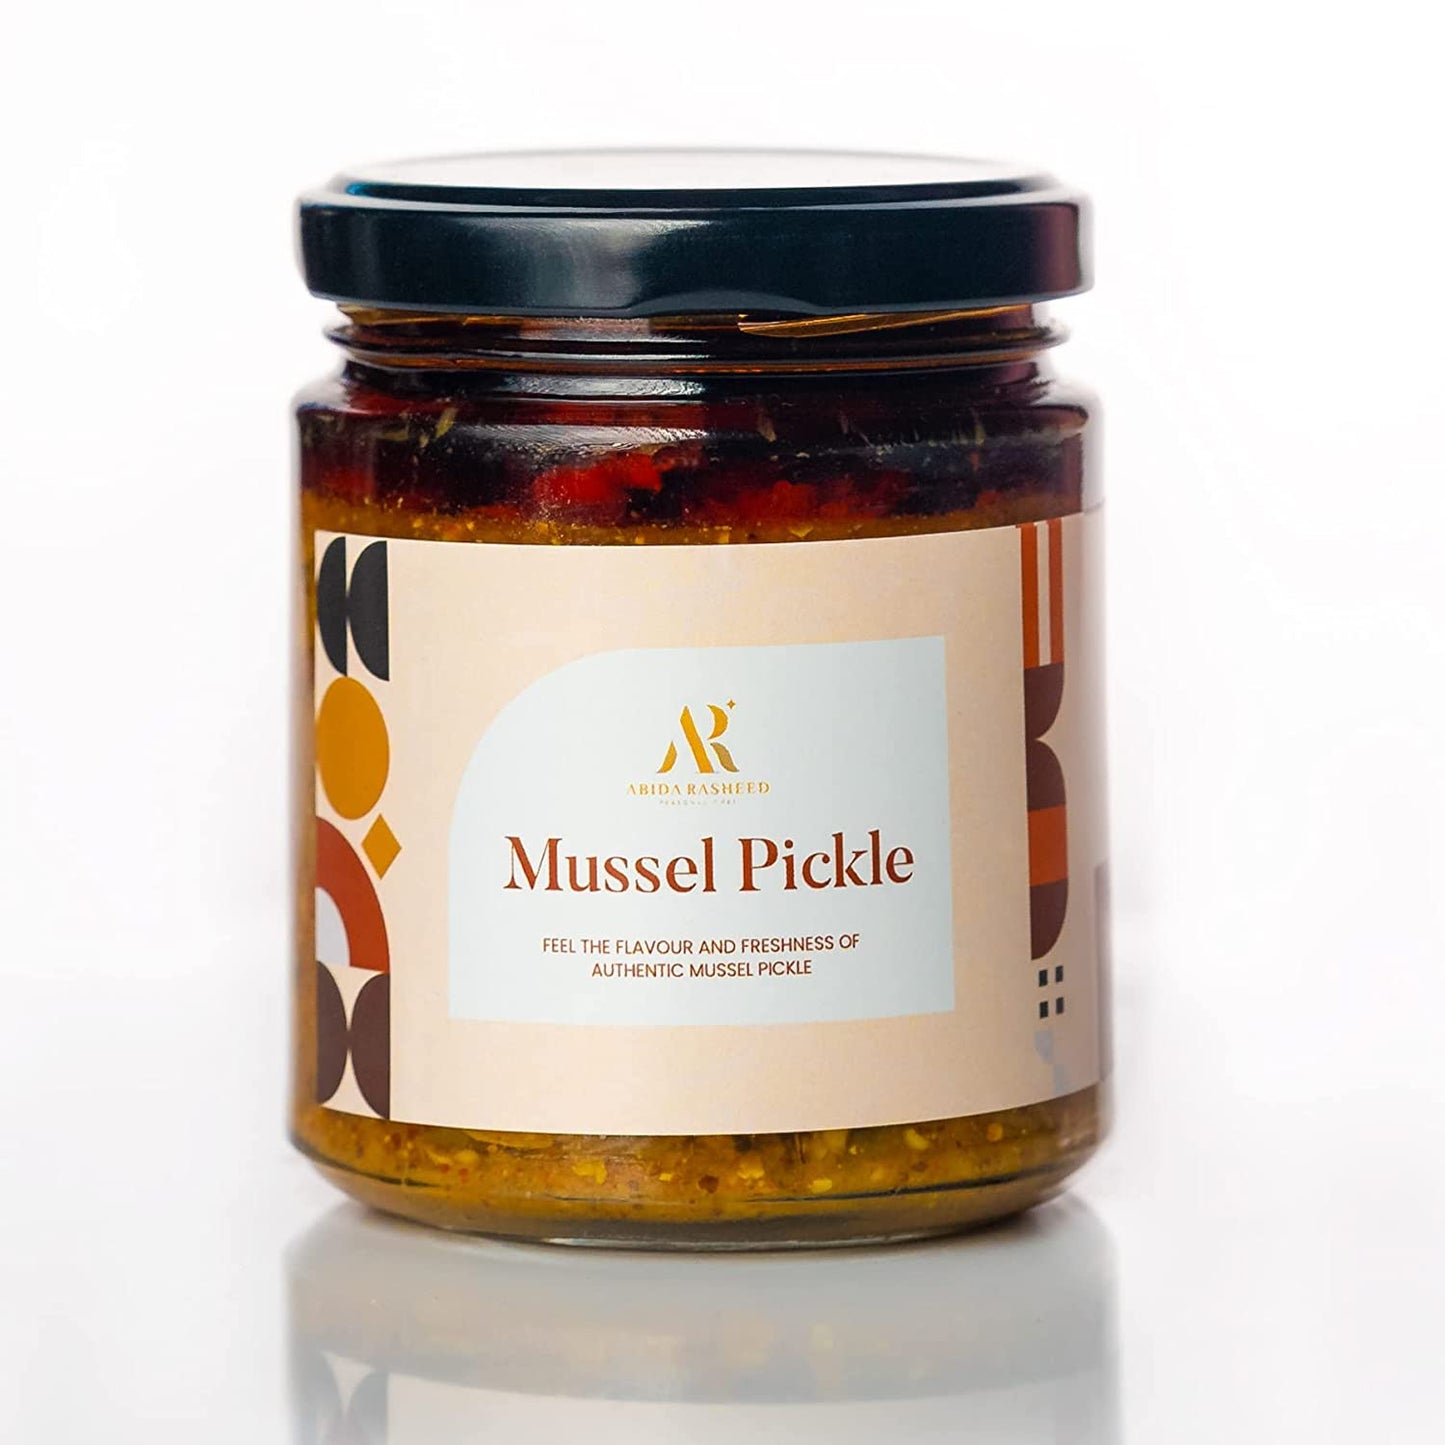 Mussel Pickle